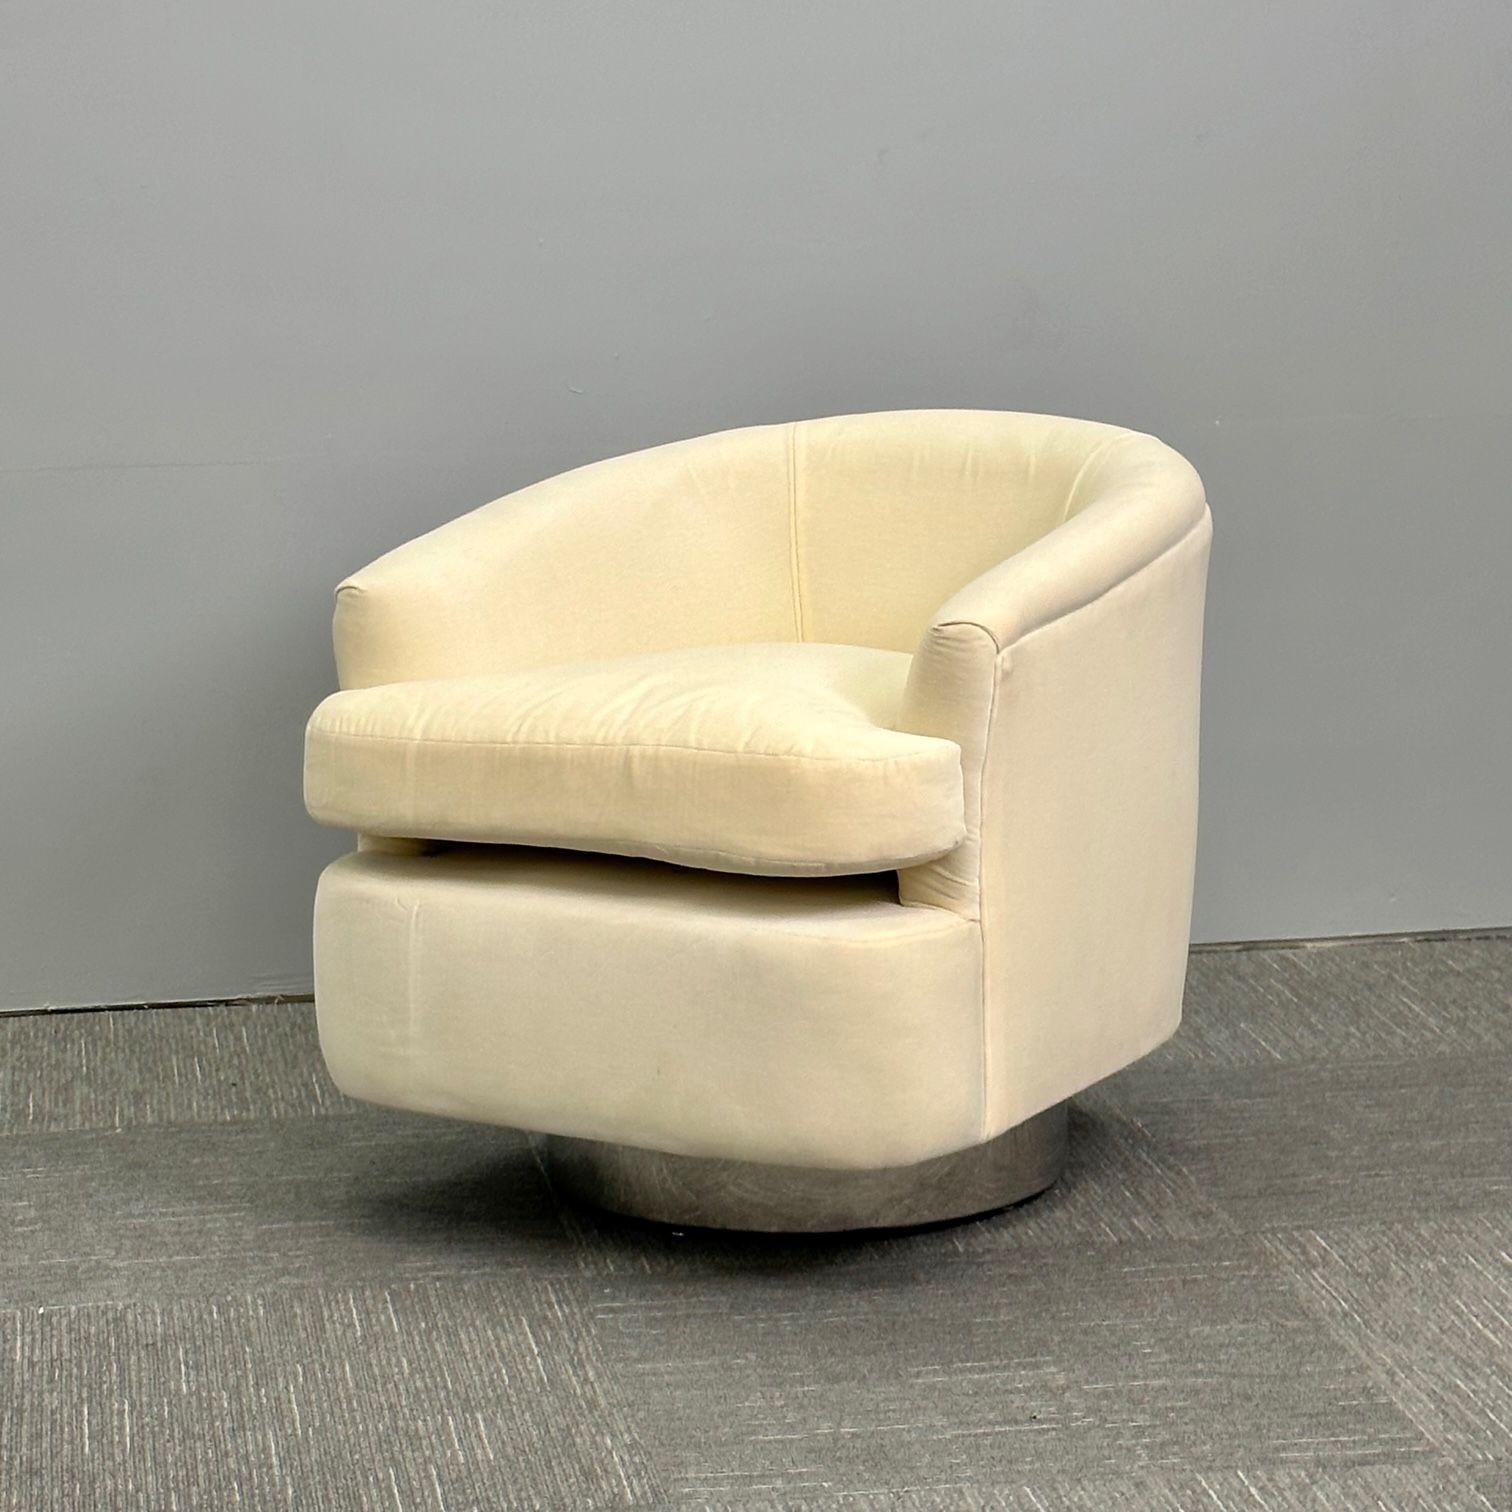 Mid-Century Modern Milo Baughman Style Swivel Chairs, Chrome Base, Cream Mohair In Excellent Condition For Sale In Stamford, CT